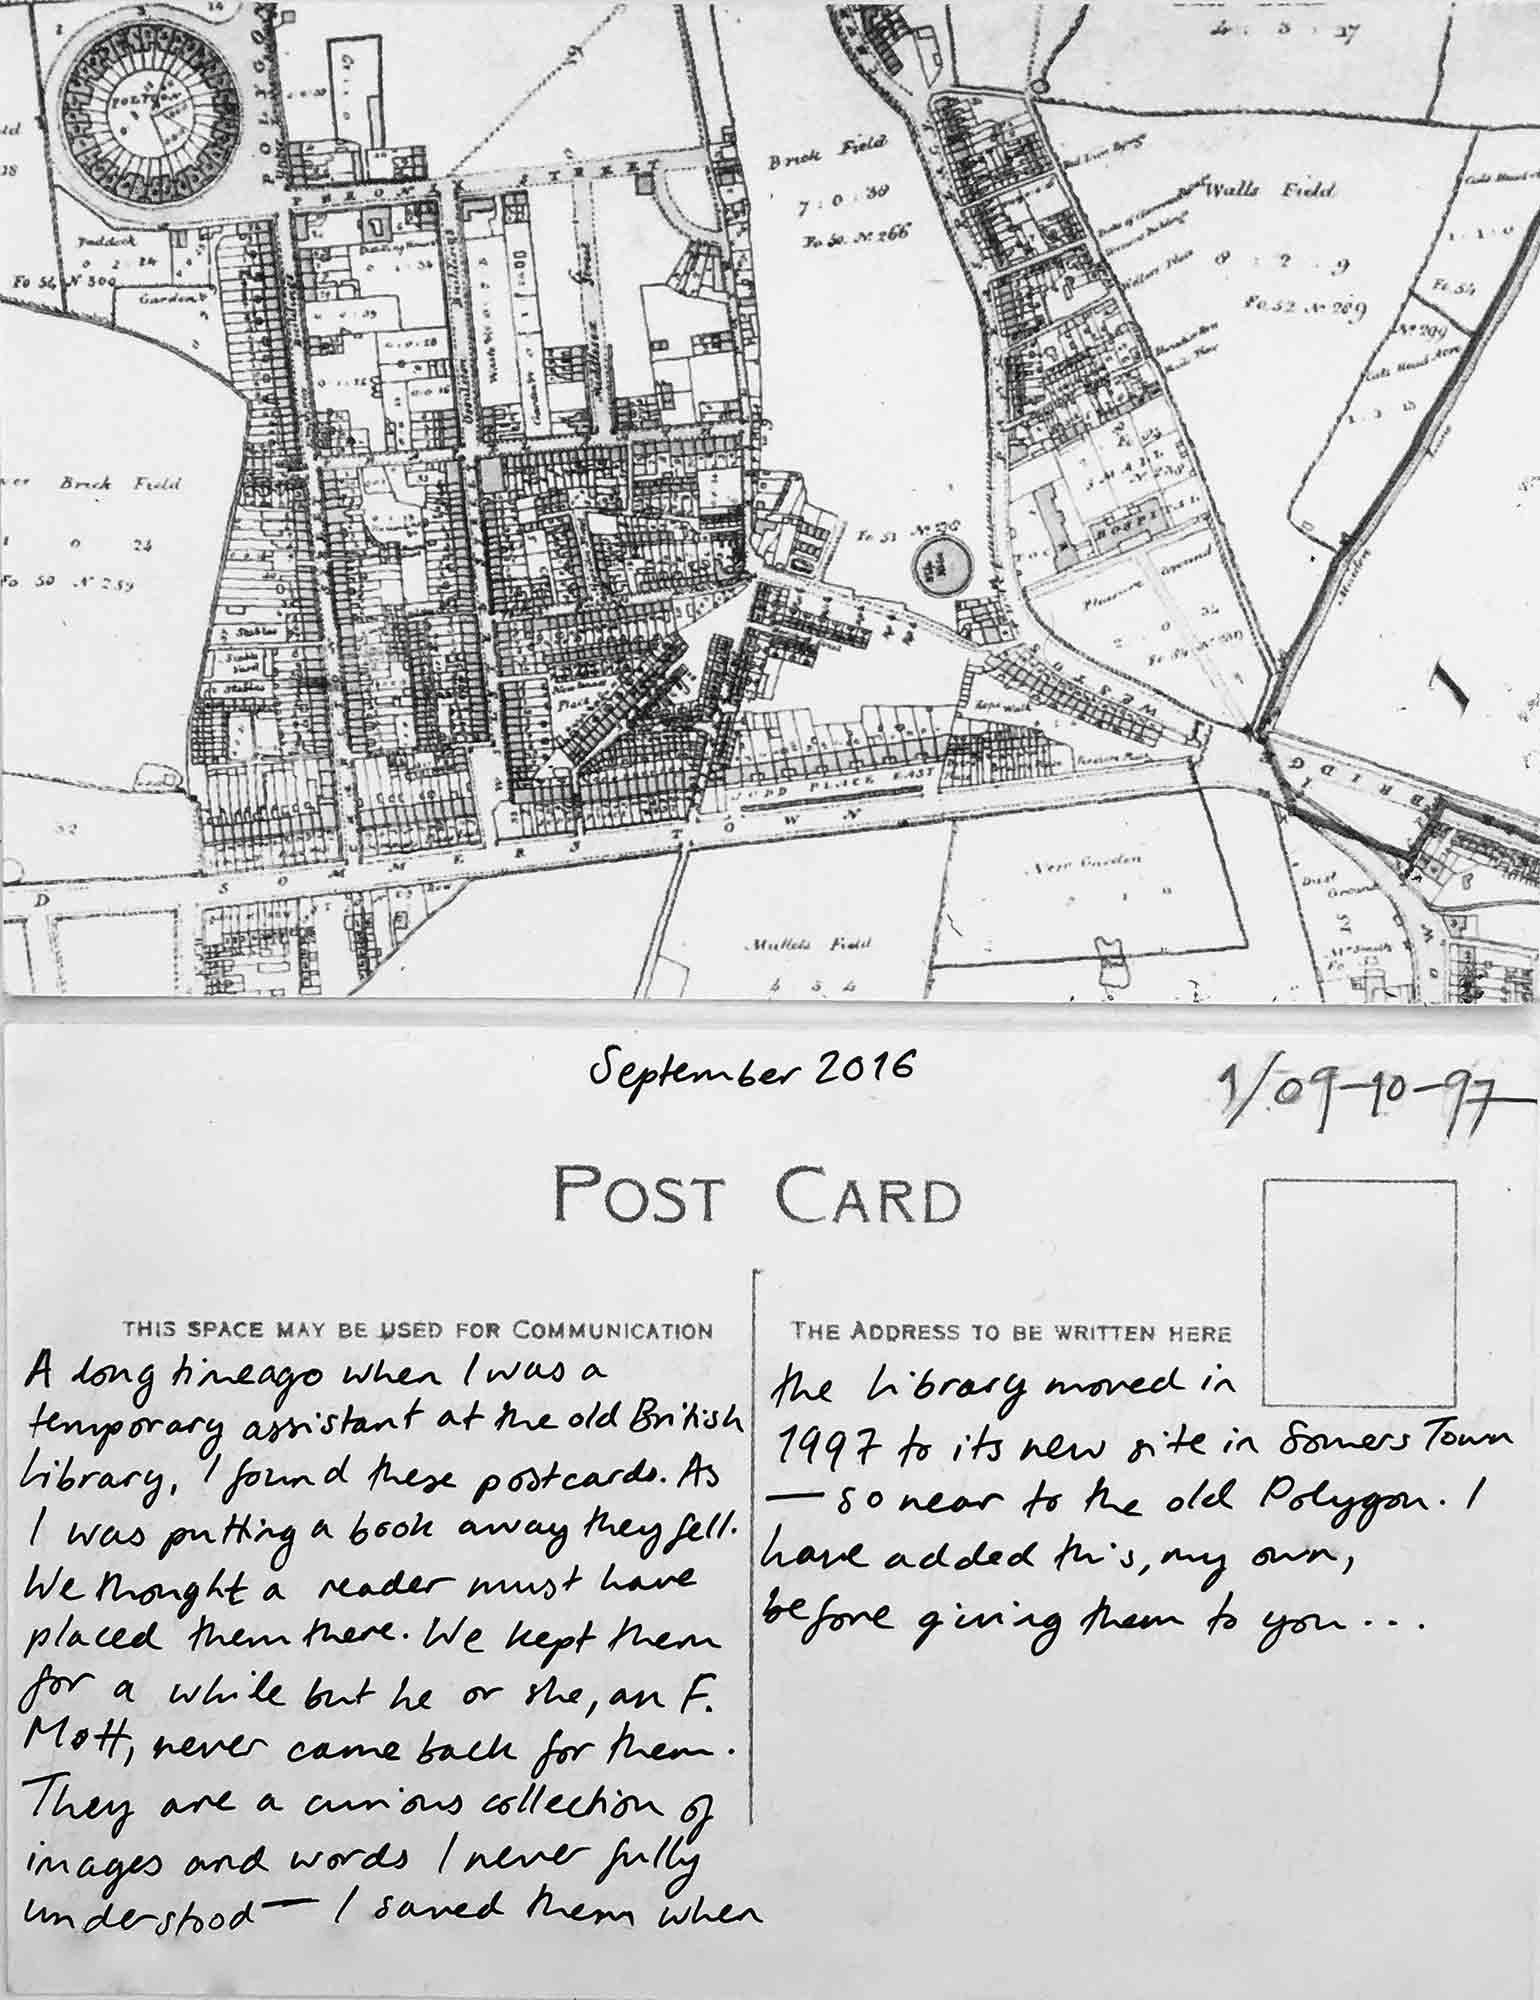 Postcard 1. Section of map, showing north of Euston Road and Somers Town of St Pancras by John Thompson, c. 1803. (King’s Cross and north of Euston Road). Public Domain. Postcard and text by Emma Cheatle, 2016.